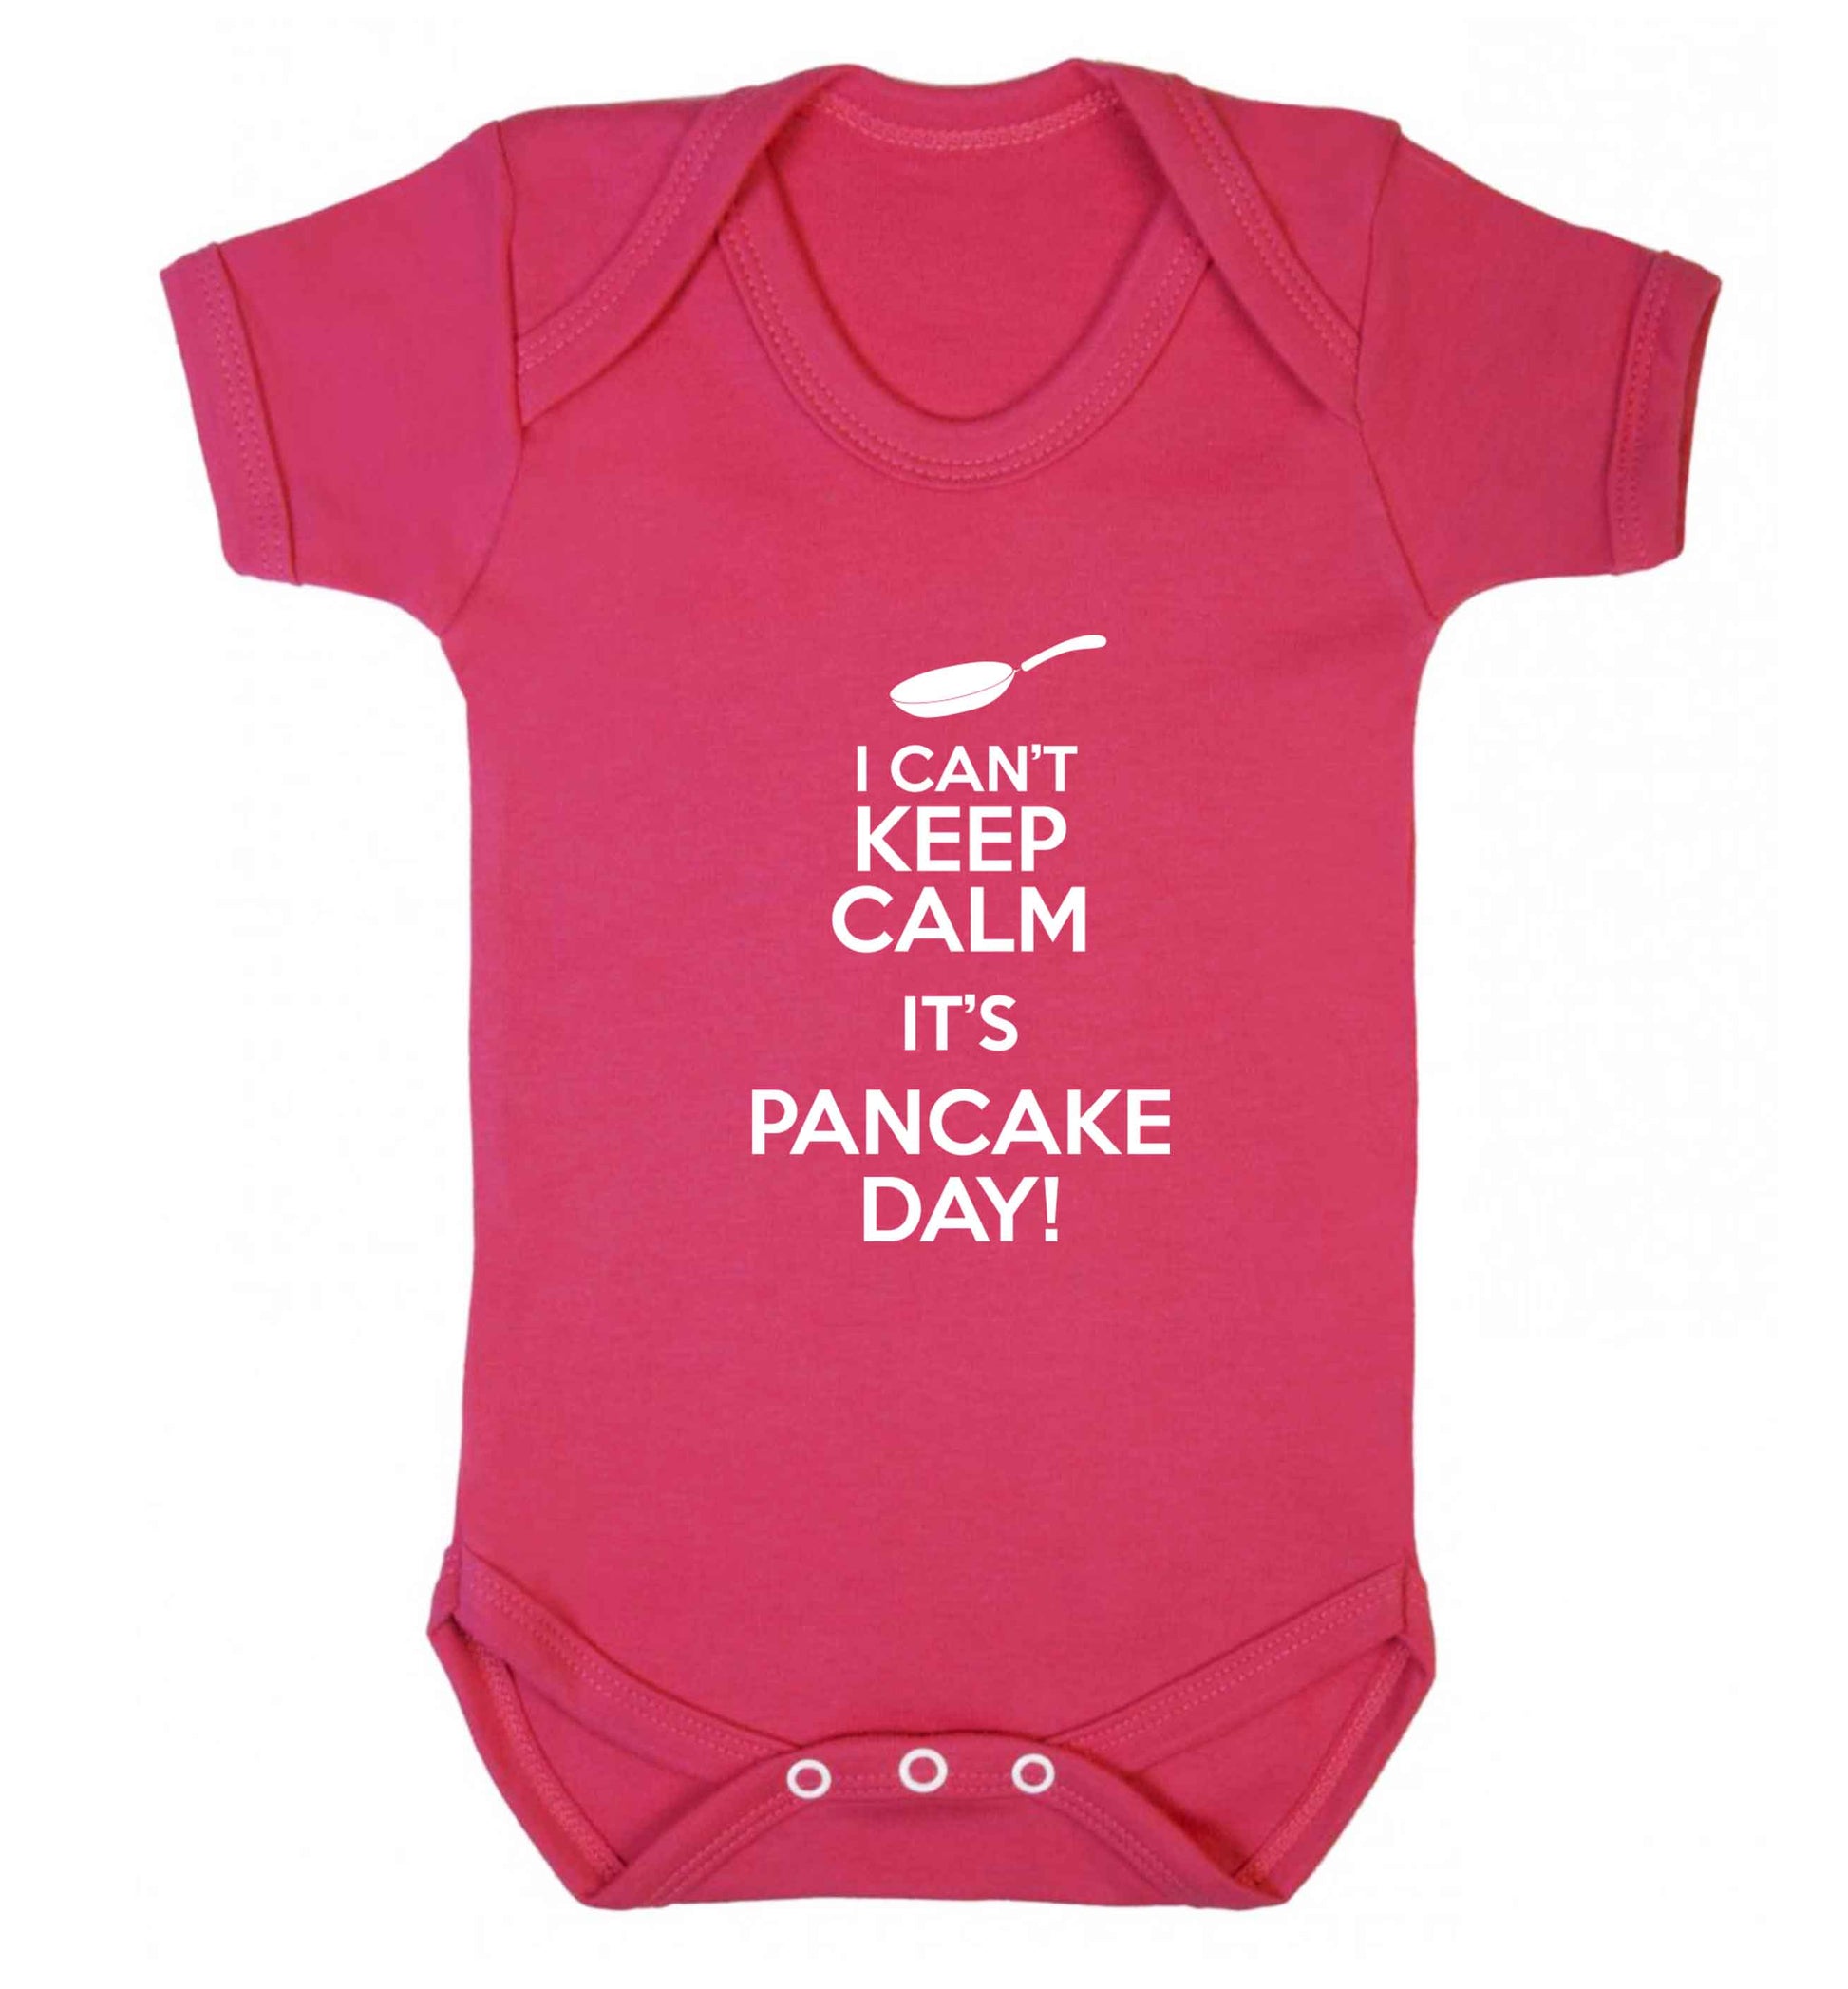 I can't keep calm it's pancake day! baby vest dark pink 18-24 months